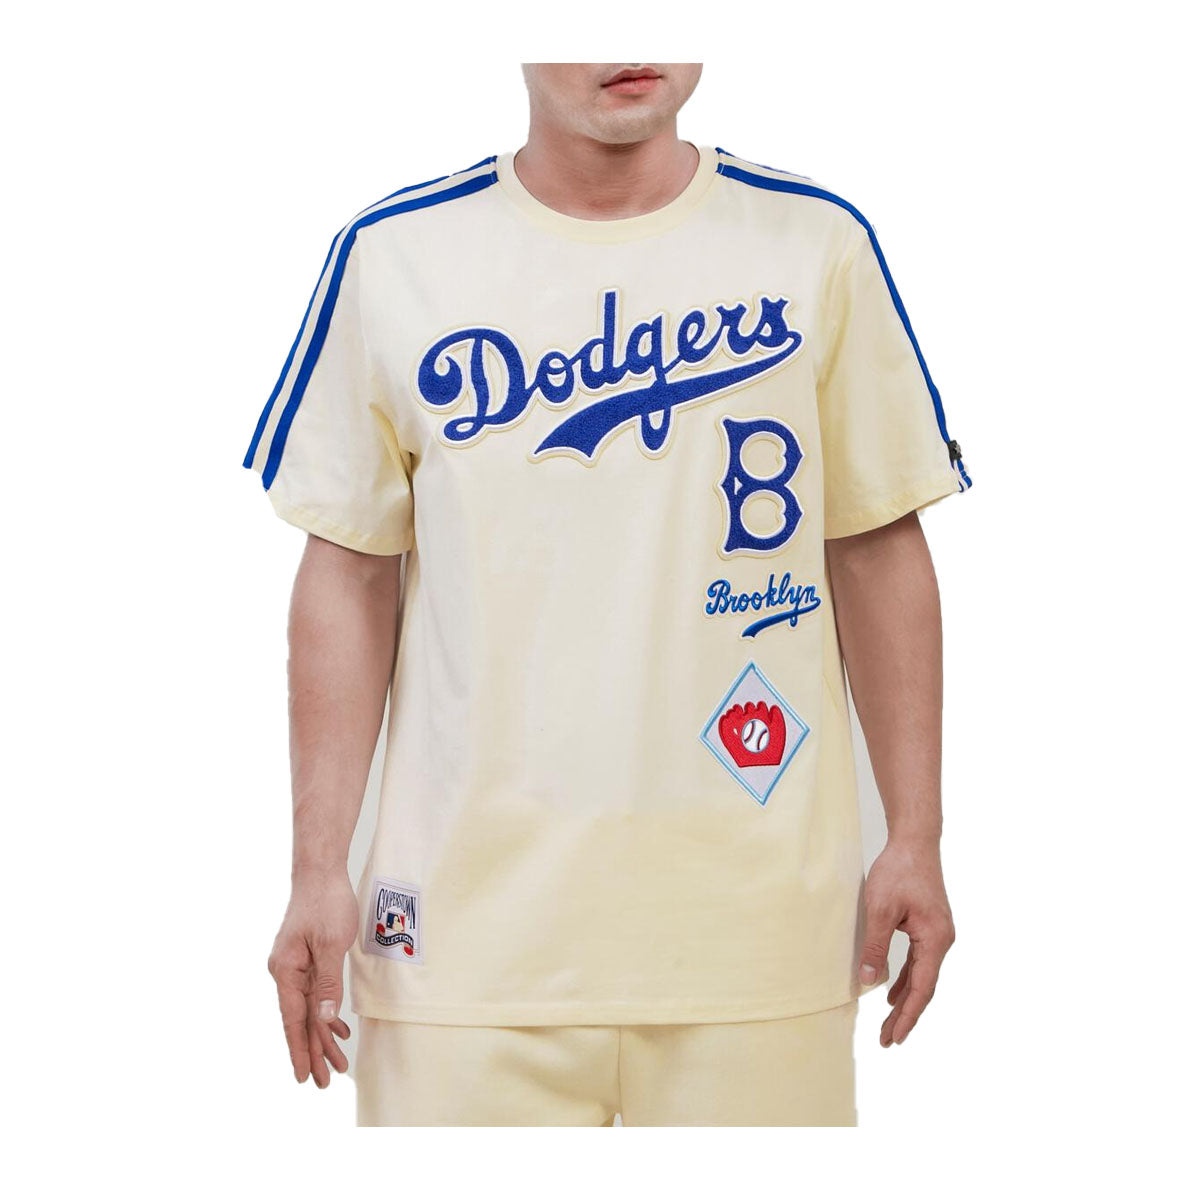 dodgers throwback jersey